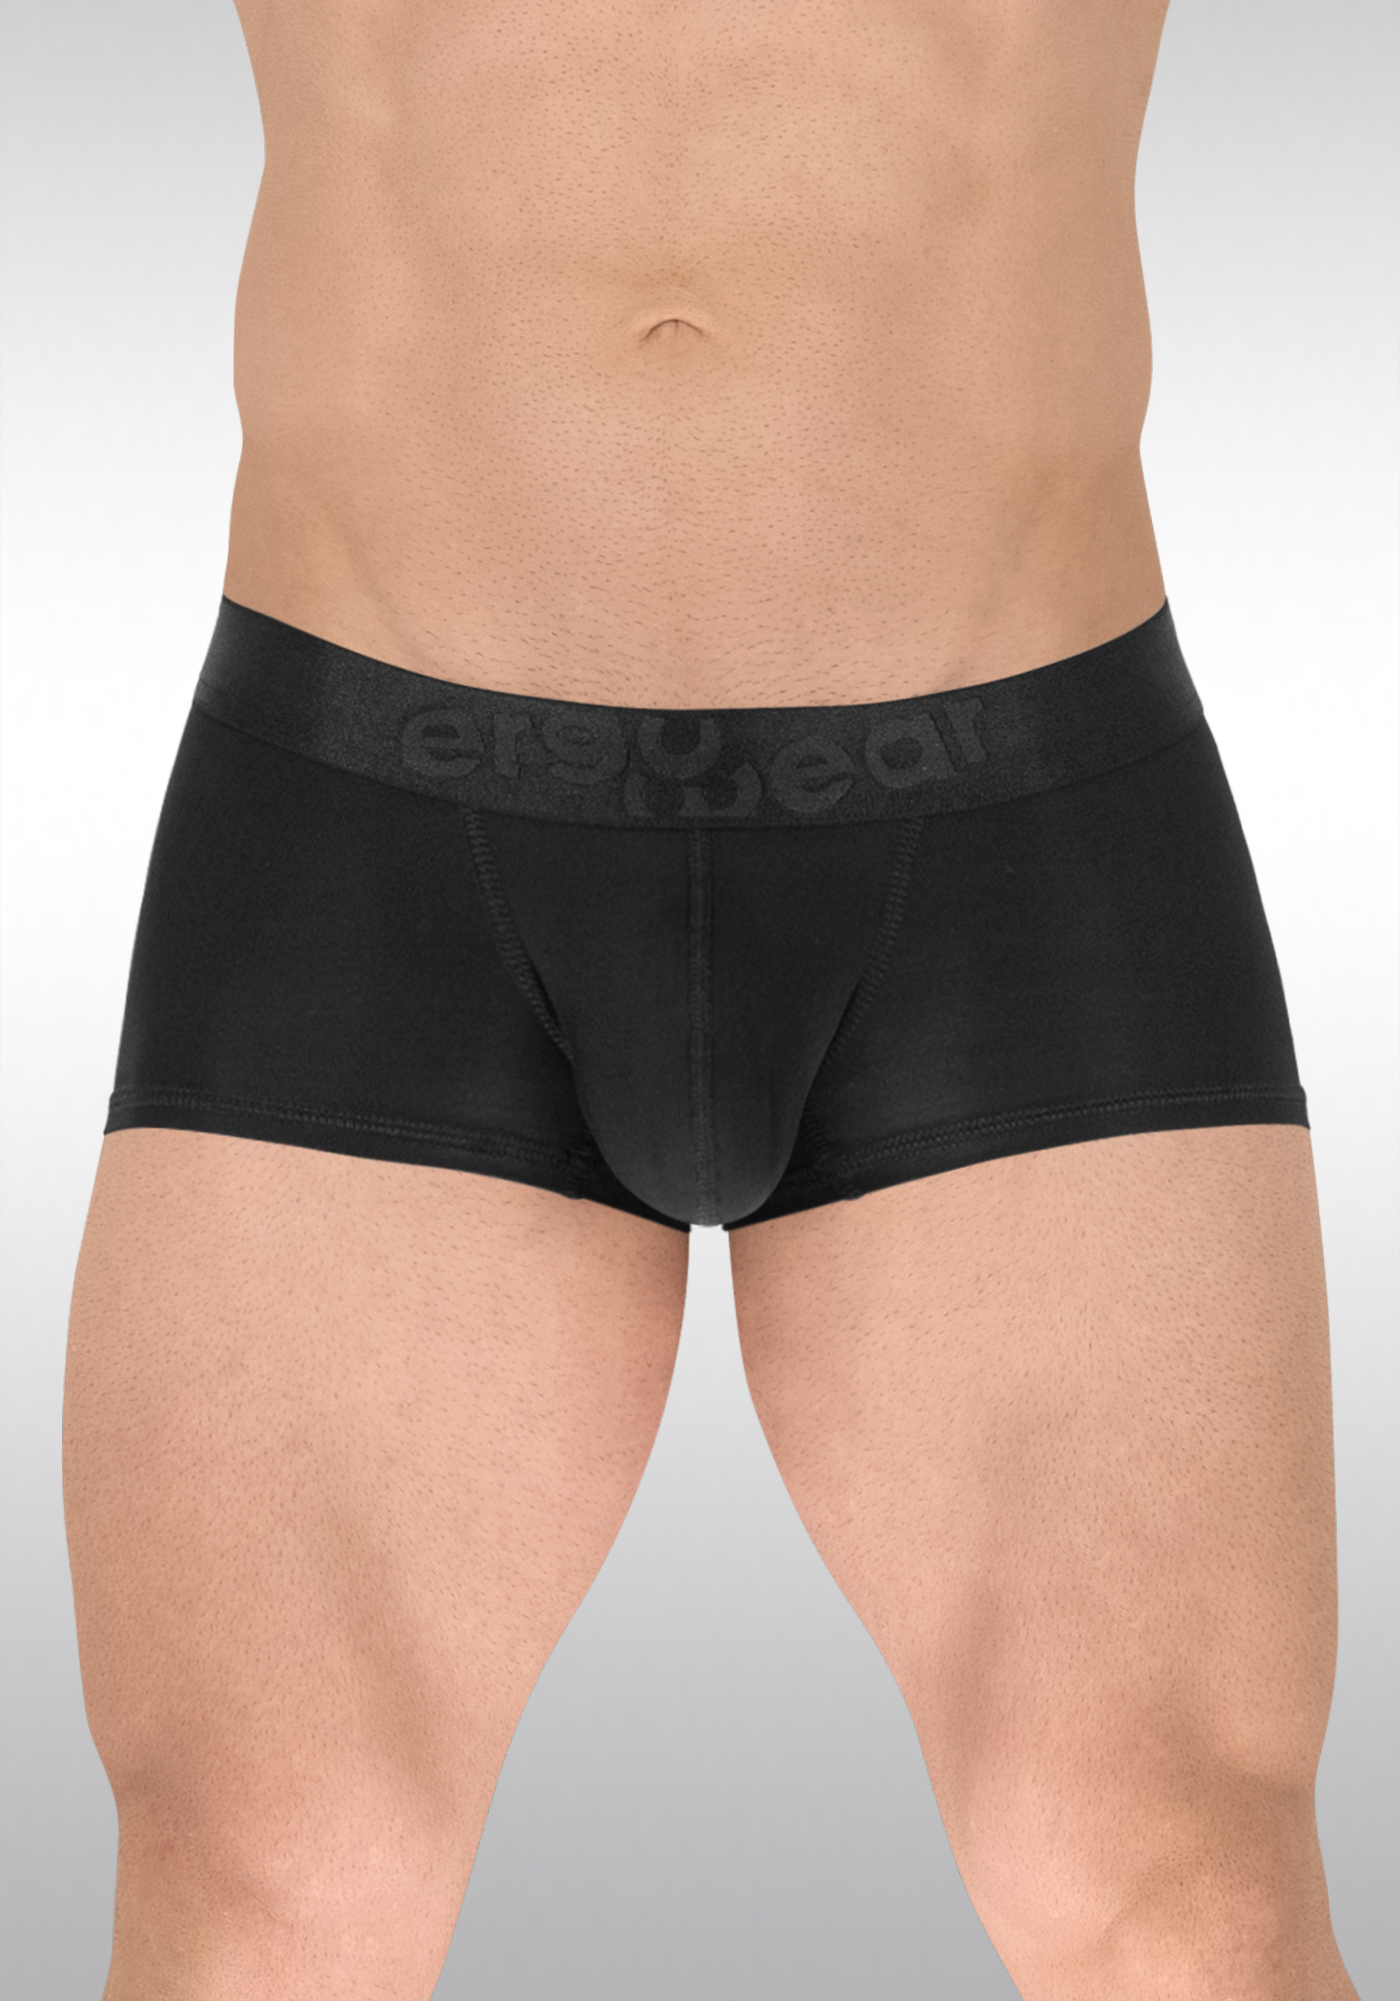 Everyday Poly Pouch Underwear For Men, Big & Tall